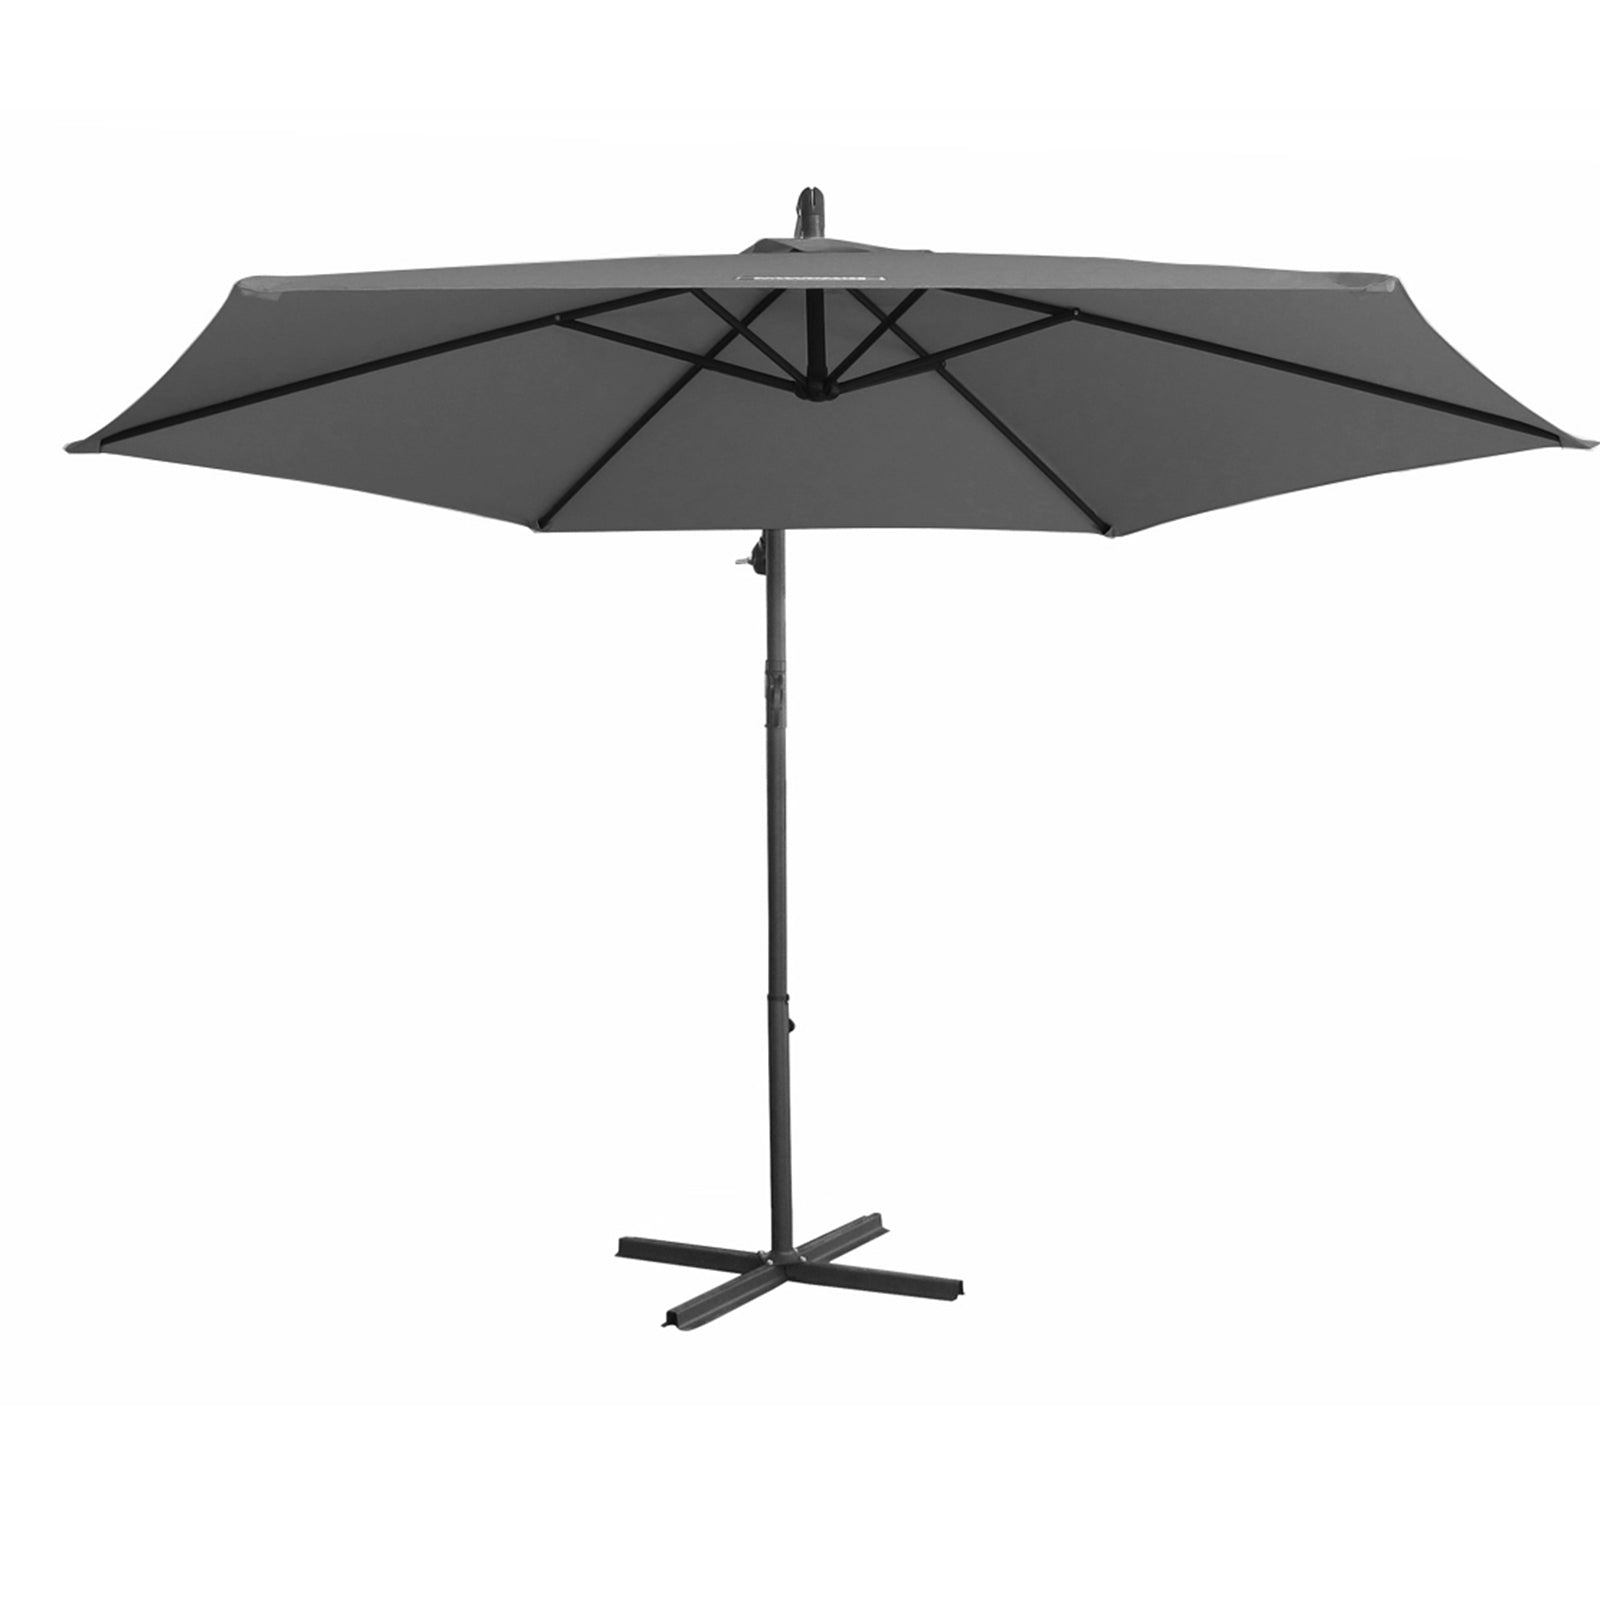 Milano Outdoor - Outdoor 3 Meter Hanging and Folding Umbrella - Charcoal